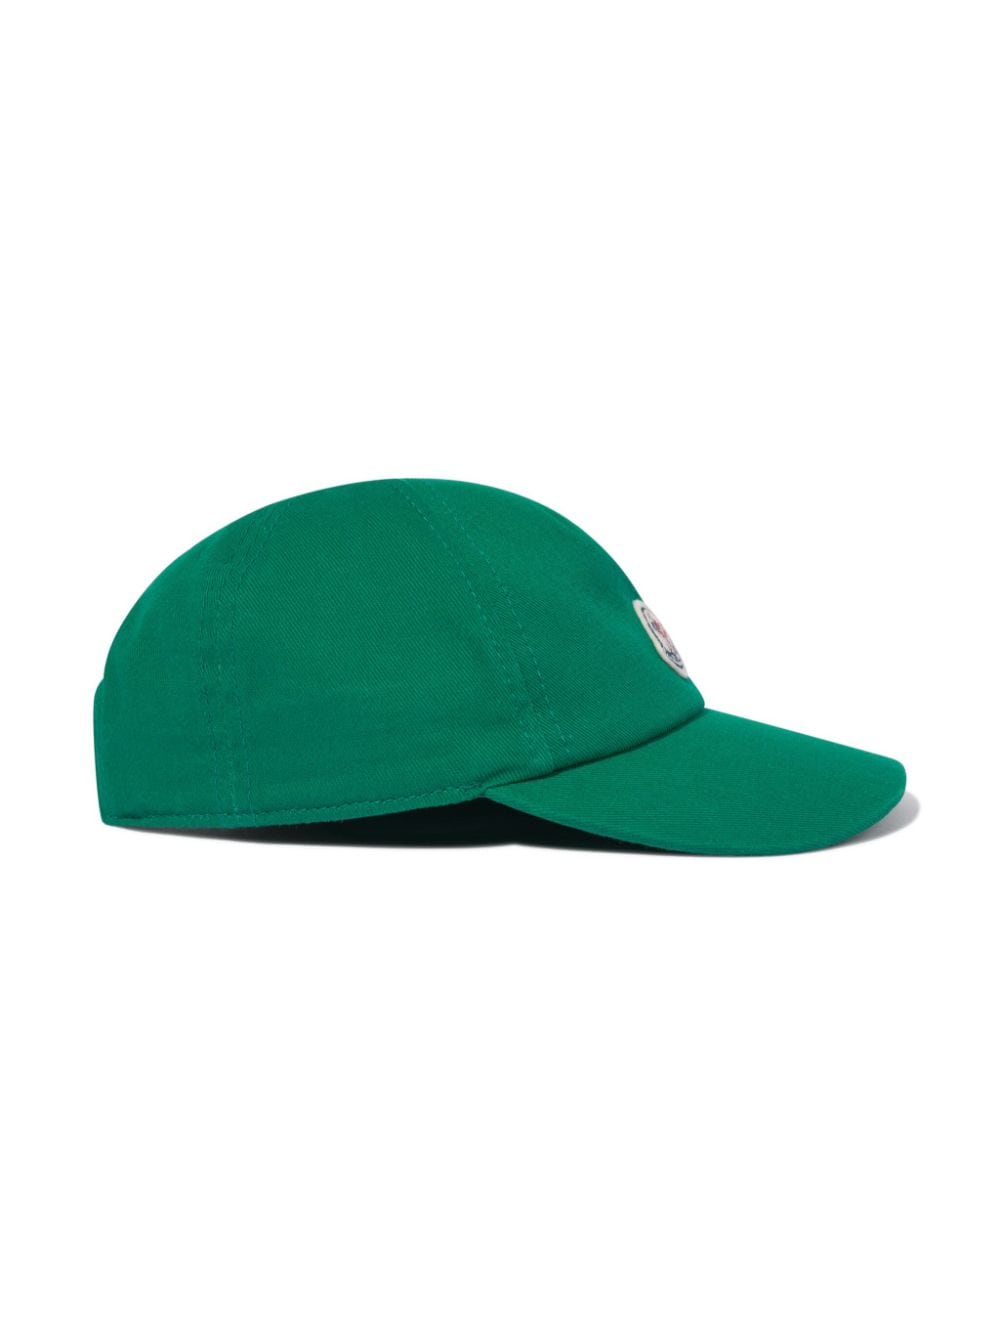 Green baby hat with logo